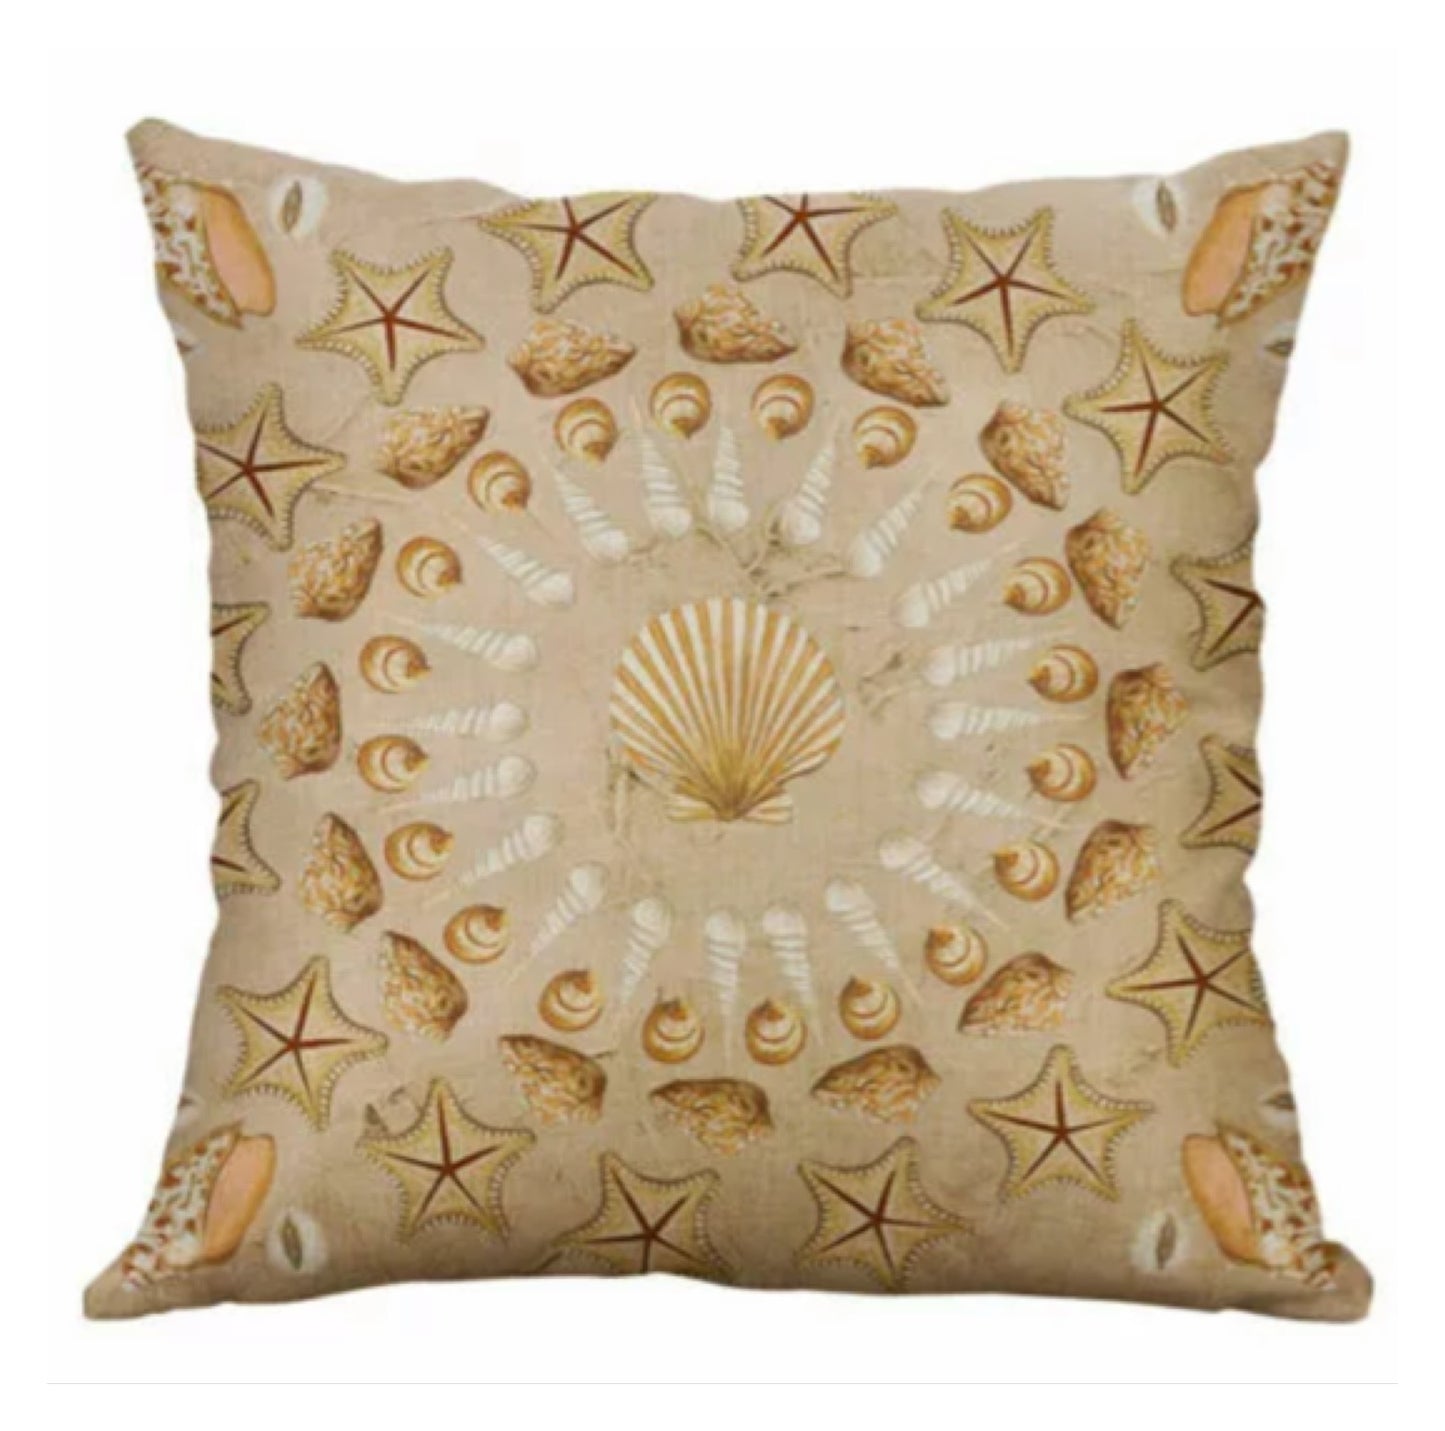 Cushion Sea Shells Natural Ocean - The Renmy Store Homewares & Gifts 